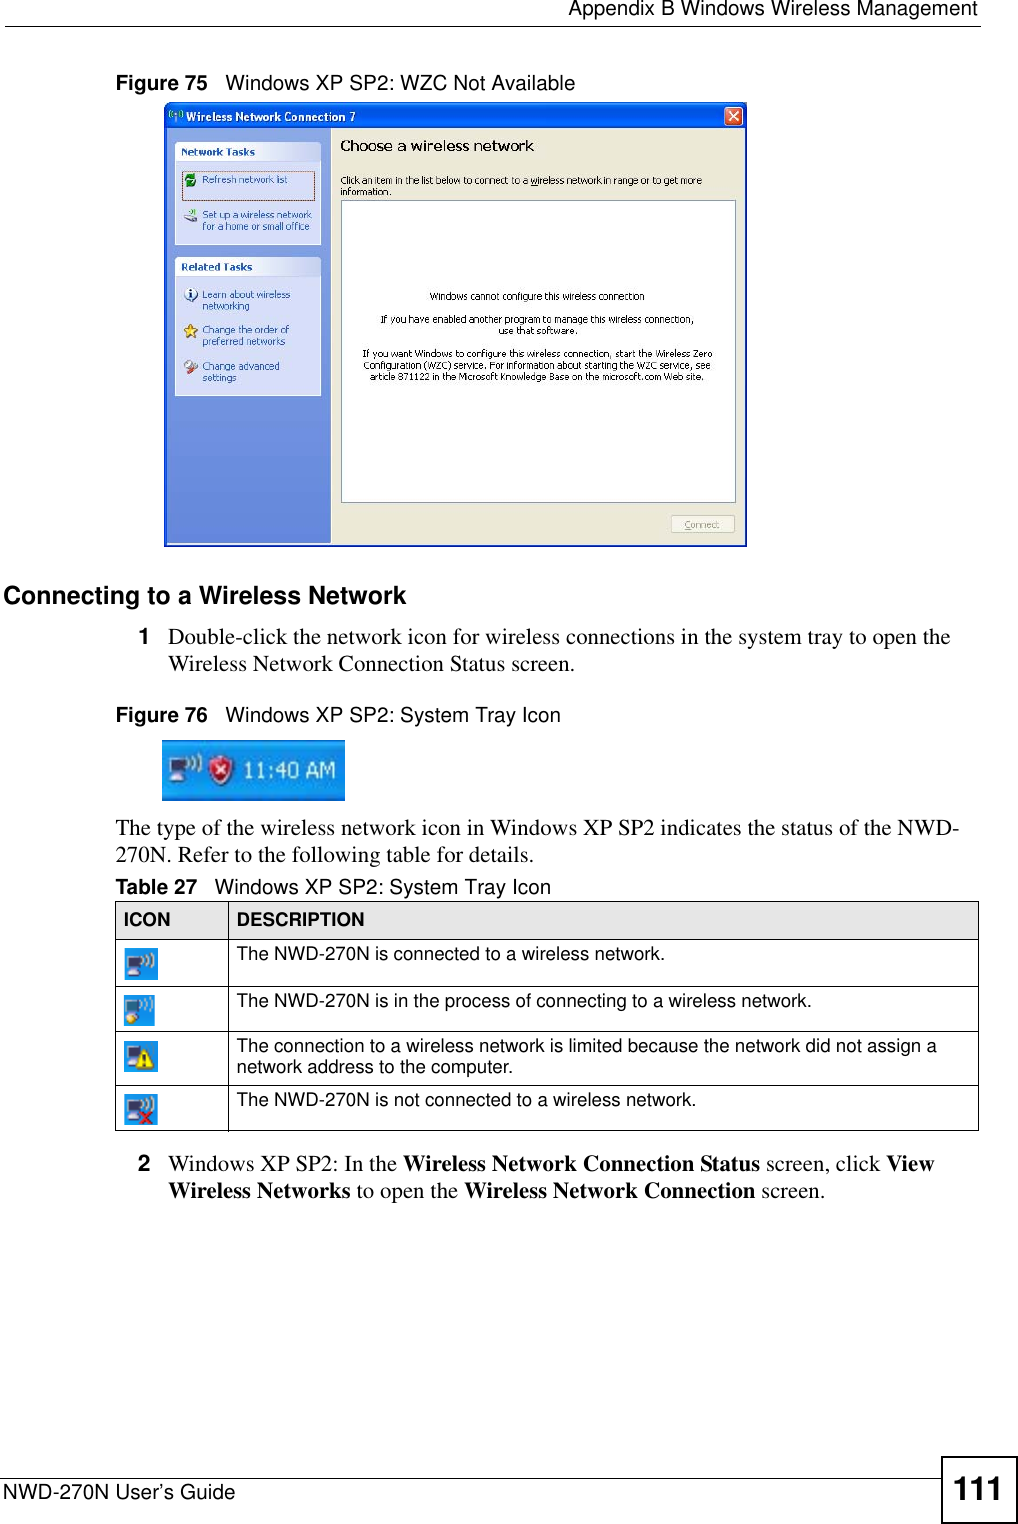  Appendix B Windows Wireless ManagementNWD-270N User’s Guide 111Figure 75   Windows XP SP2: WZC Not AvailableConnecting to a Wireless Network 1Double-click the network icon for wireless connections in the system tray to open the Wireless Network Connection Status screen.Figure 76   Windows XP SP2: System Tray IconThe type of the wireless network icon in Windows XP SP2 indicates the status of the NWD-270N. Refer to the following table for details.2Windows XP SP2: In the Wireless Network Connection Status screen, click View Wireless Networks to open the Wireless Network Connection screen.Table 27   Windows XP SP2: System Tray IconICON DESCRIPTIONThe NWD-270N is connected to a wireless network.The NWD-270N is in the process of connecting to a wireless network.The connection to a wireless network is limited because the network did not assign a network address to the computer.The NWD-270N is not connected to a wireless network.